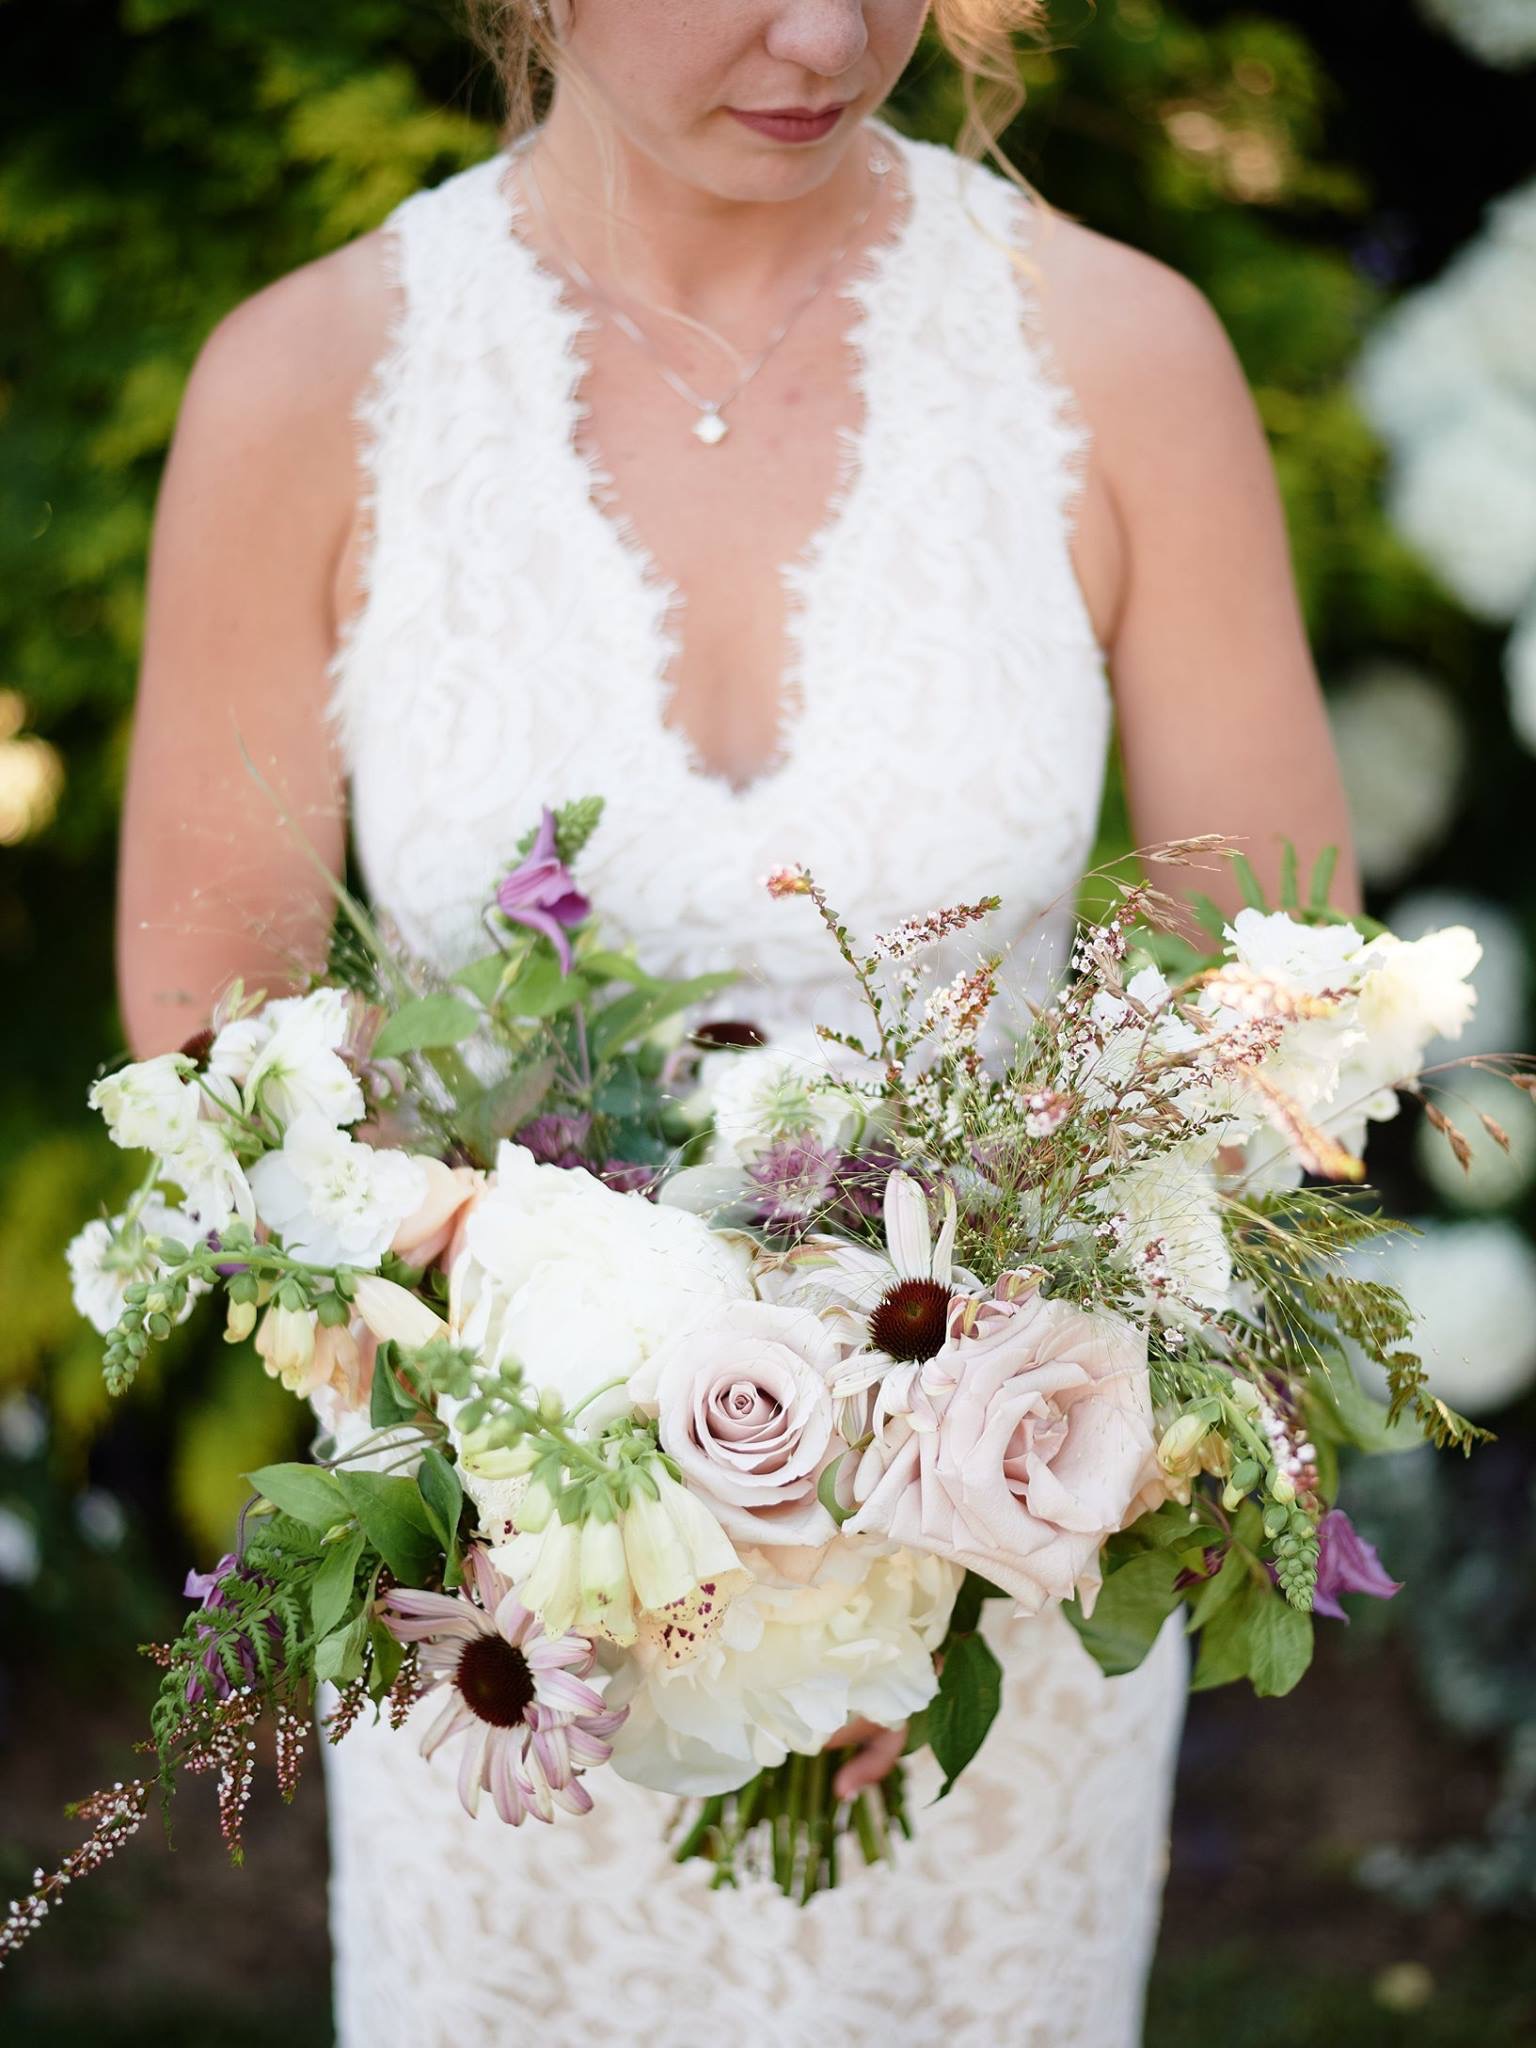 Organic bridal bouquet with greens, blush and lavender colors - Pearl Weddings & Events